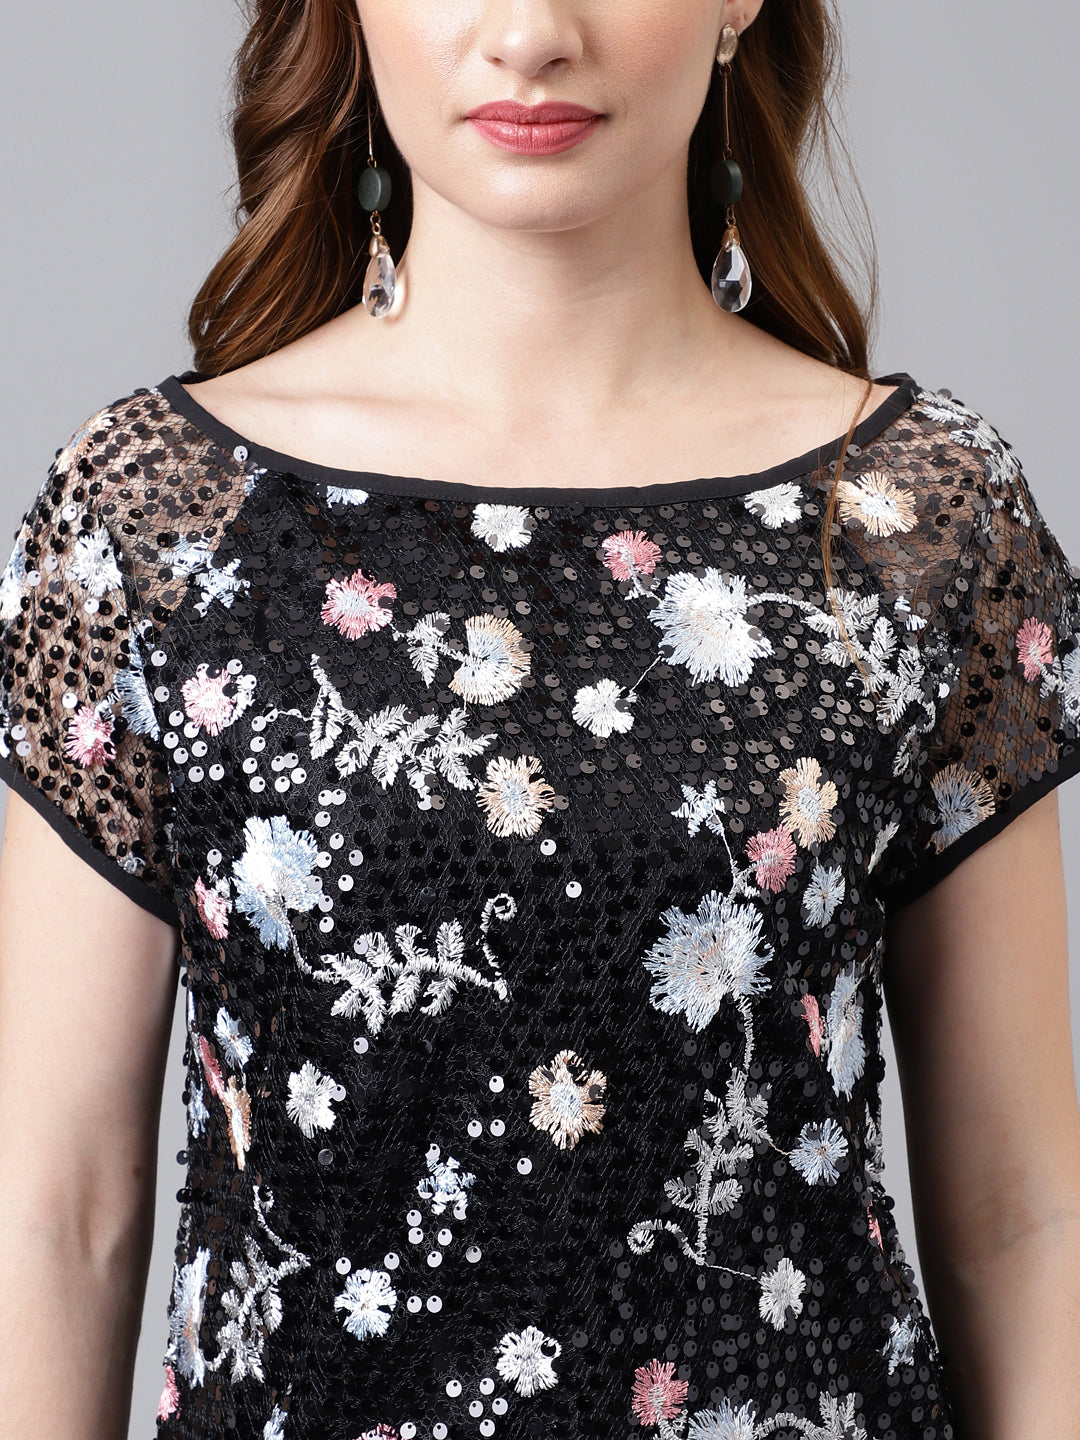 Black Cap Sleeve Round Neck Solid Blouse For Women